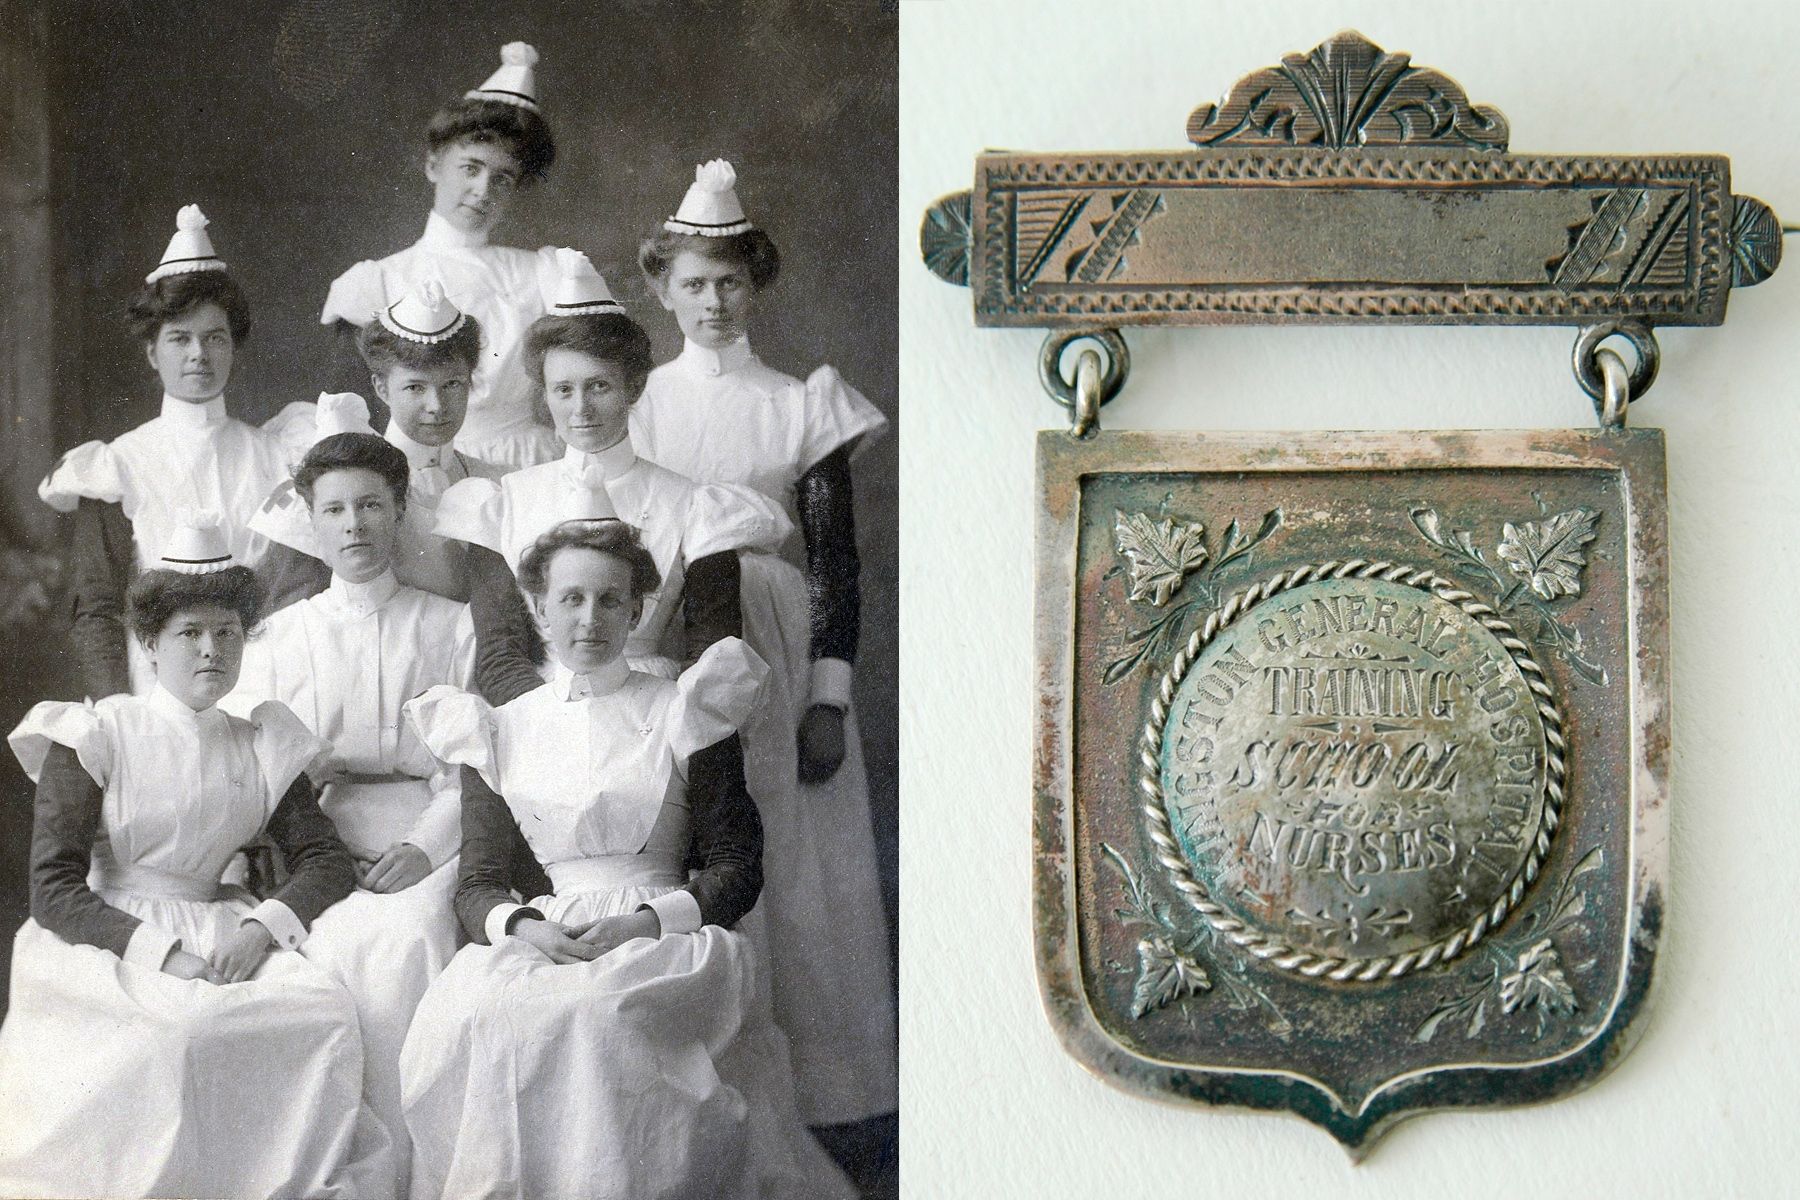 Members of the classes of 1905 and 1906 were among some of the first graduates of the KGH School of Nursing. The young women spent their own money to capture this moment for posterity. (Photo: KGH Archives) (Right) KGH School of Nursing Medal, 1888. (Photo: Museum of Health Care)